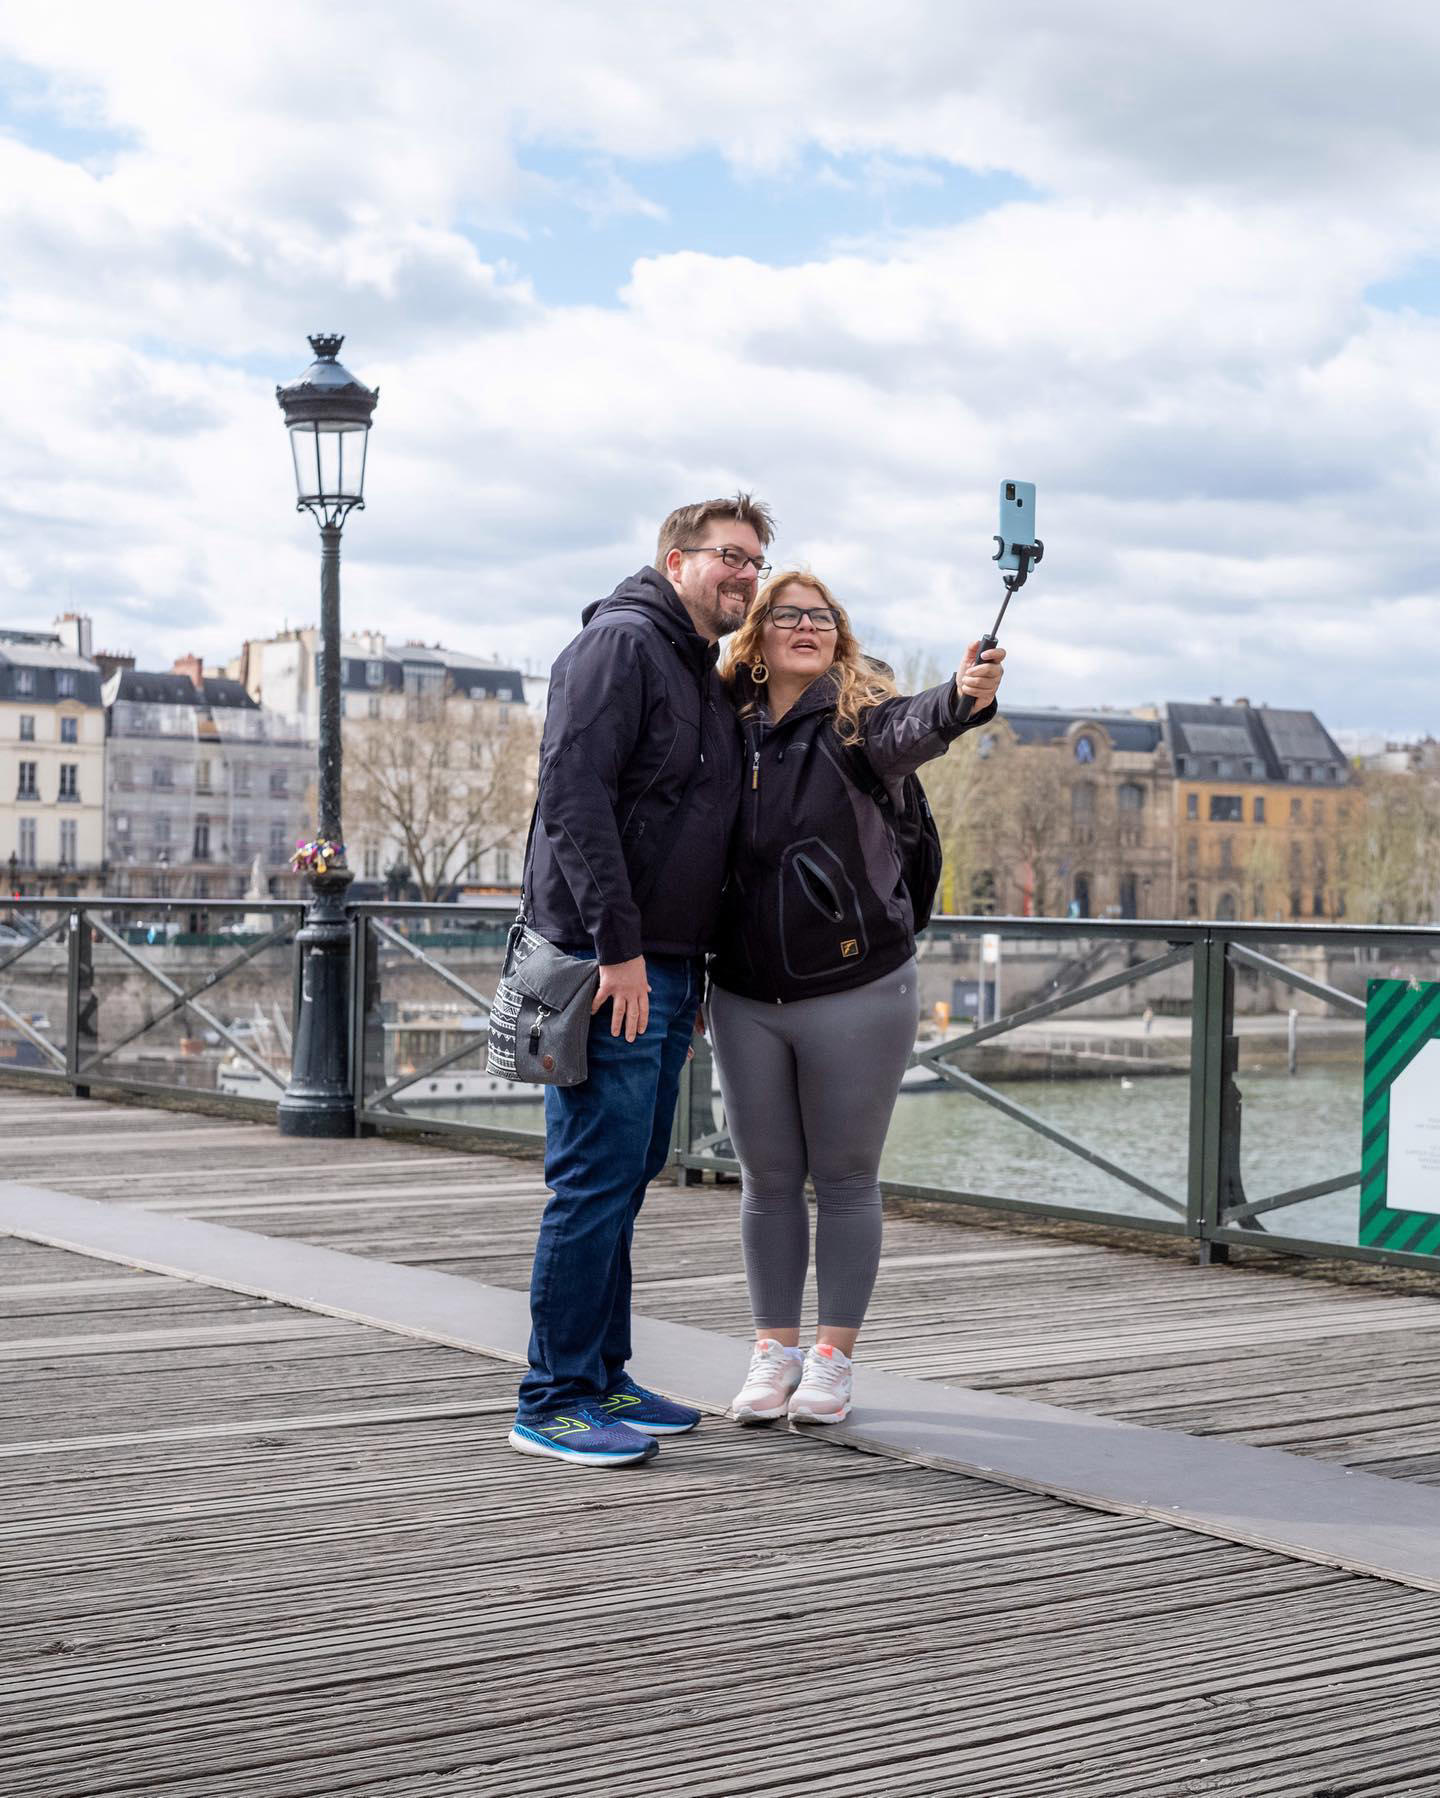 Always a good time for a selfie #thisisparis always something new to discover, taste and experience